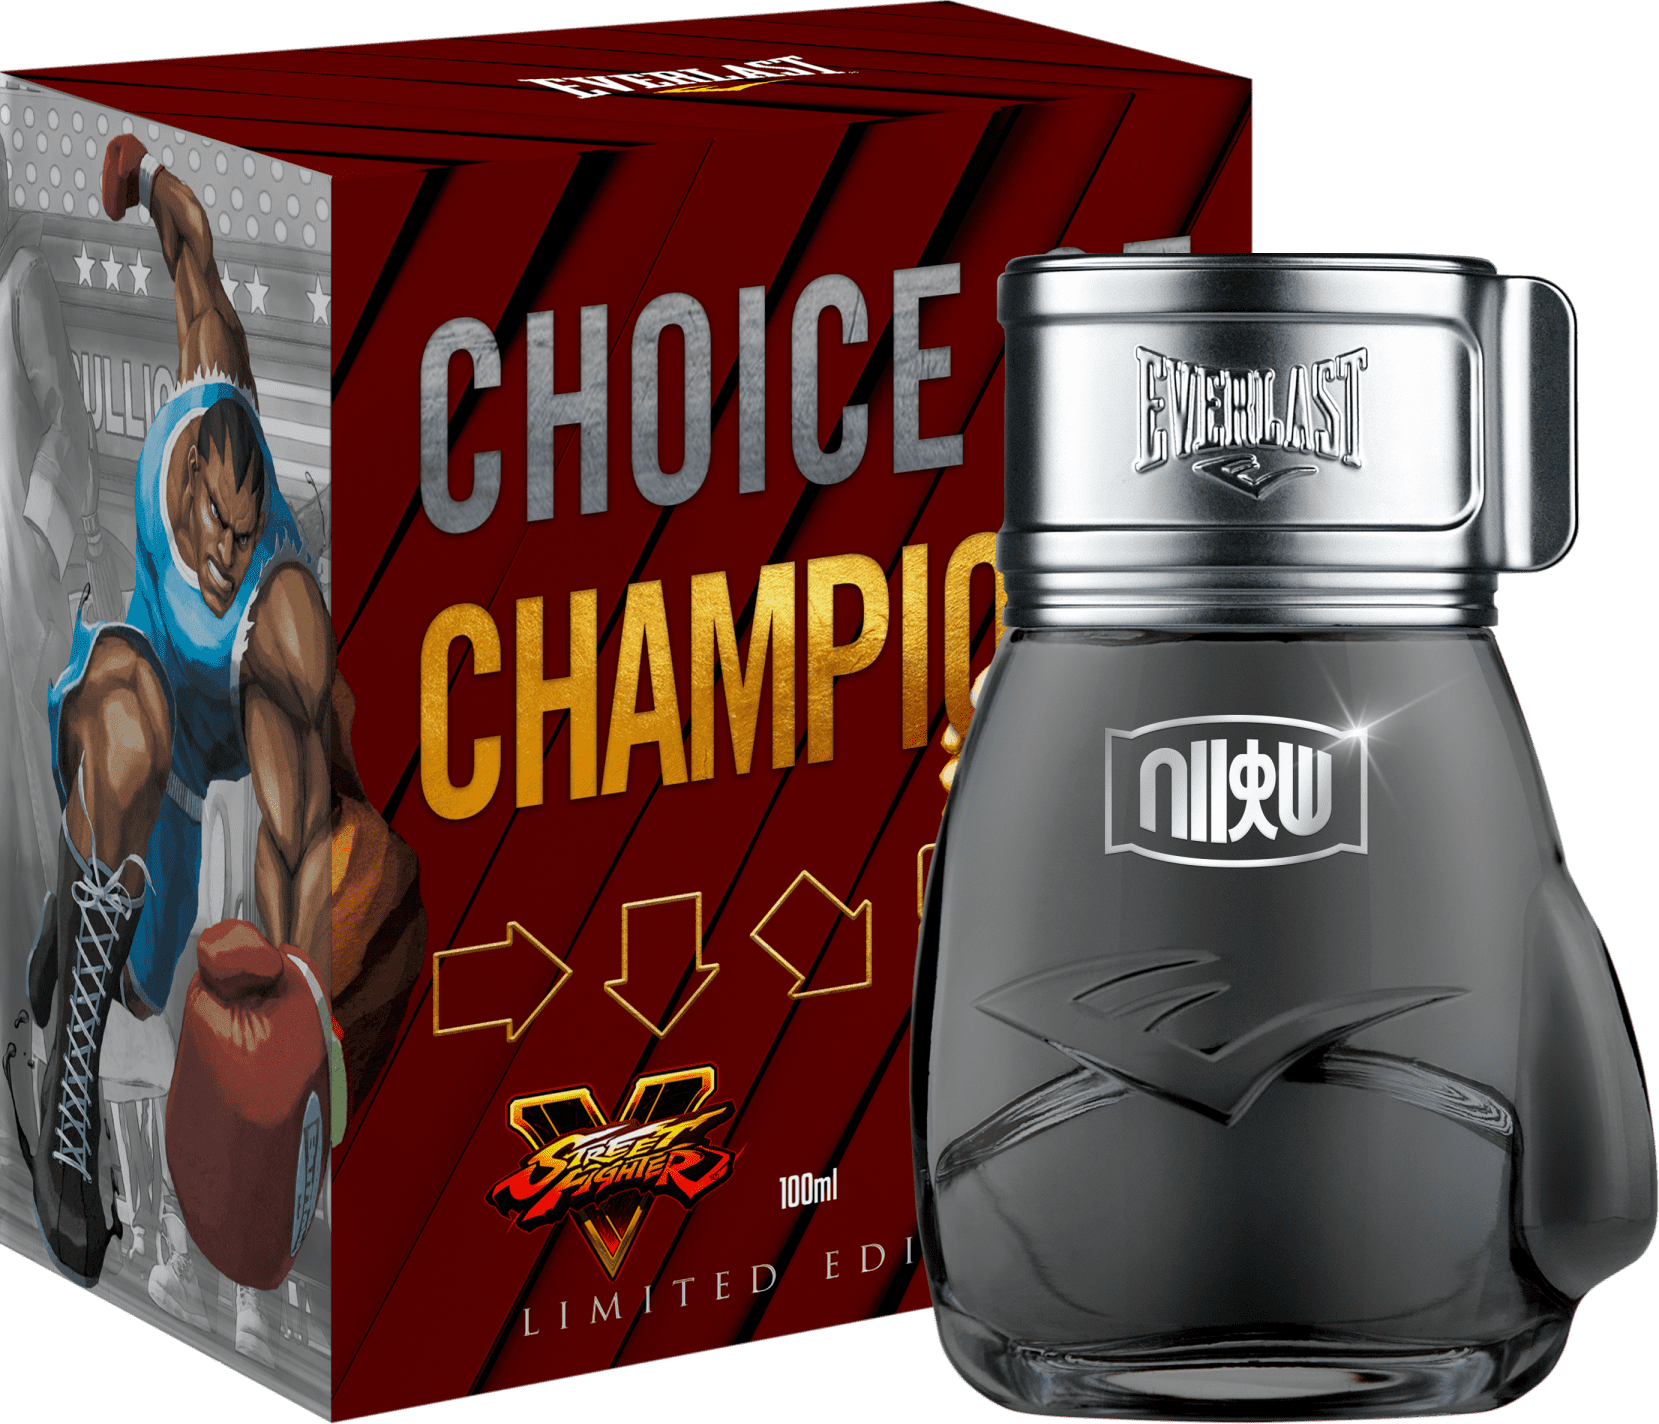 Choice Of Champions Street Fighter Brasil Everlast cologne - a